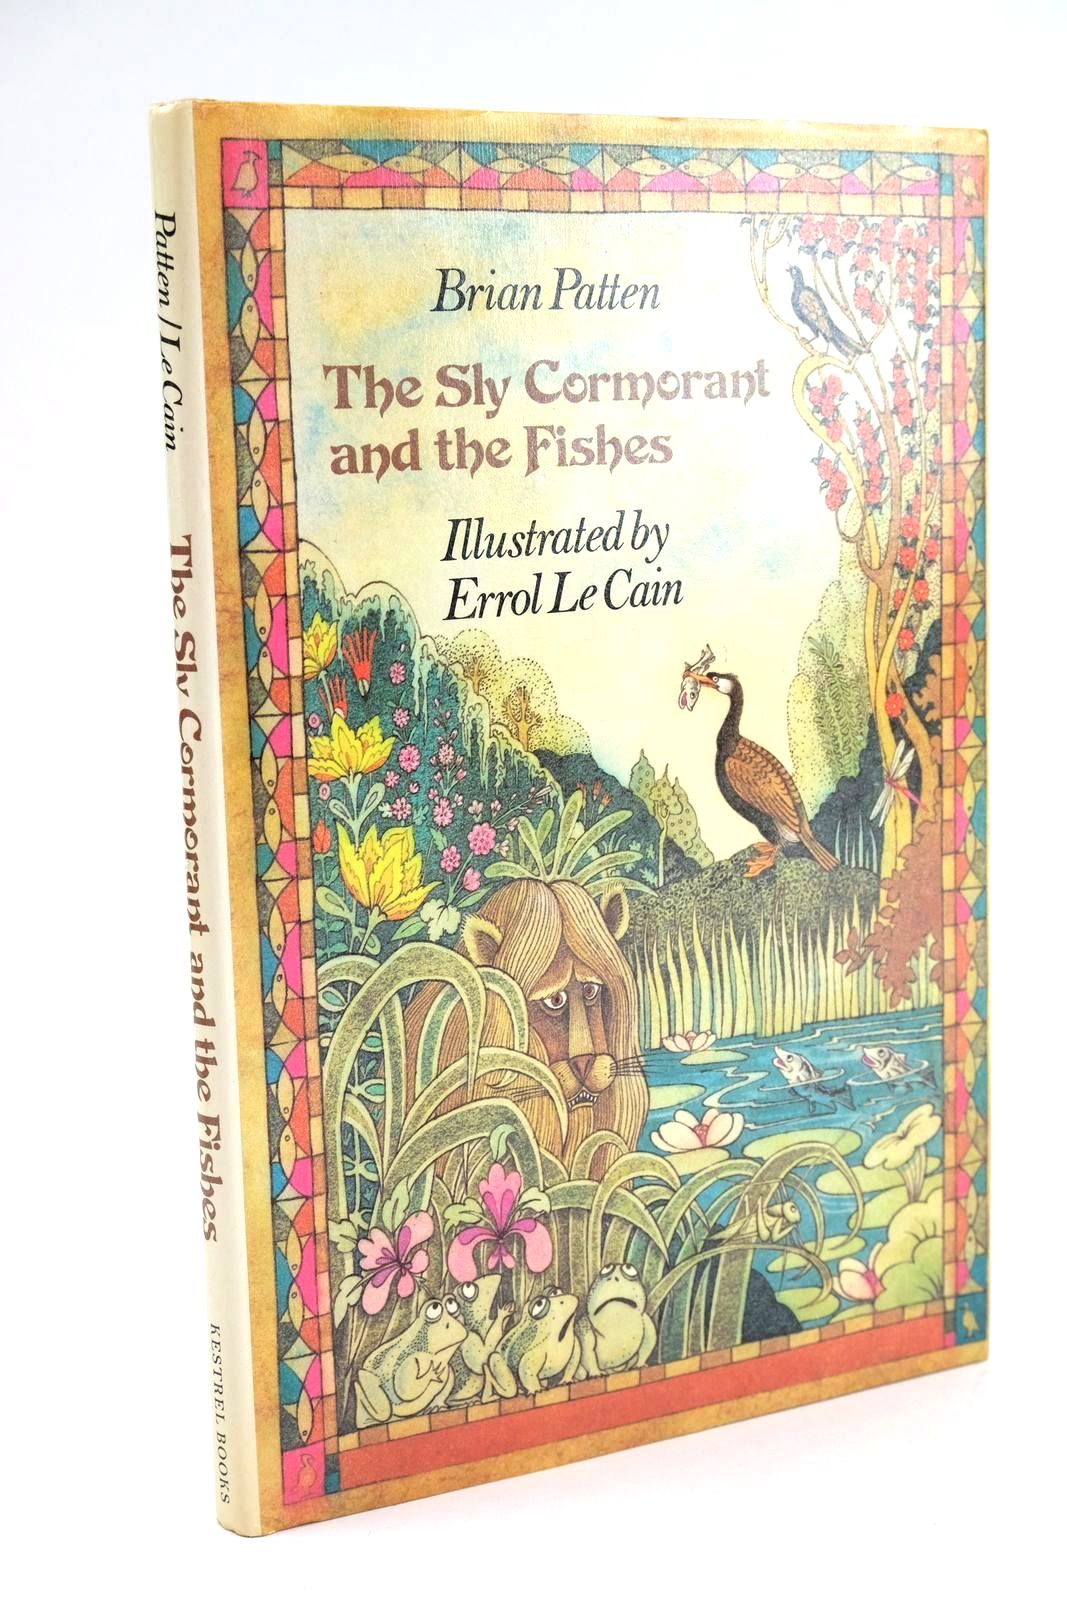 Photo of THE SLY CORMORANT AND THE FISHES written by Aesop, Patten, Brian illustrated by Le Cain, Errol published by Kestrel Books (STOCK CODE: 1325013)  for sale by Stella & Rose's Books